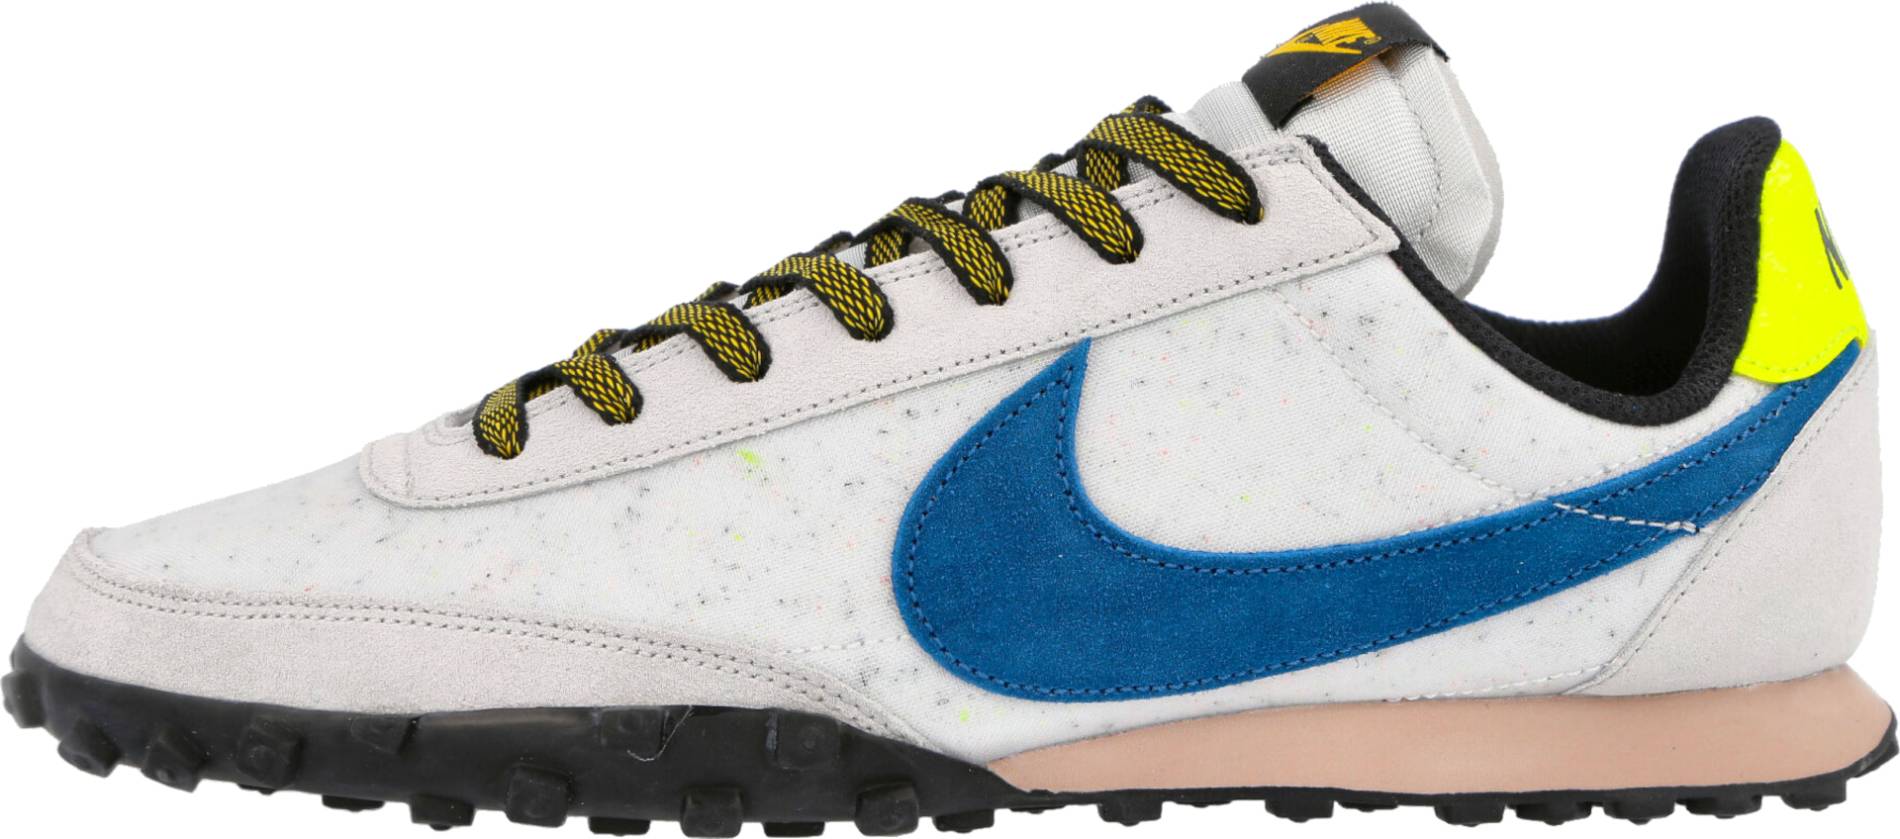 Nike waffle runner nike Waffle Racer sneakers in 5 colors (only $30) | RunRepeat